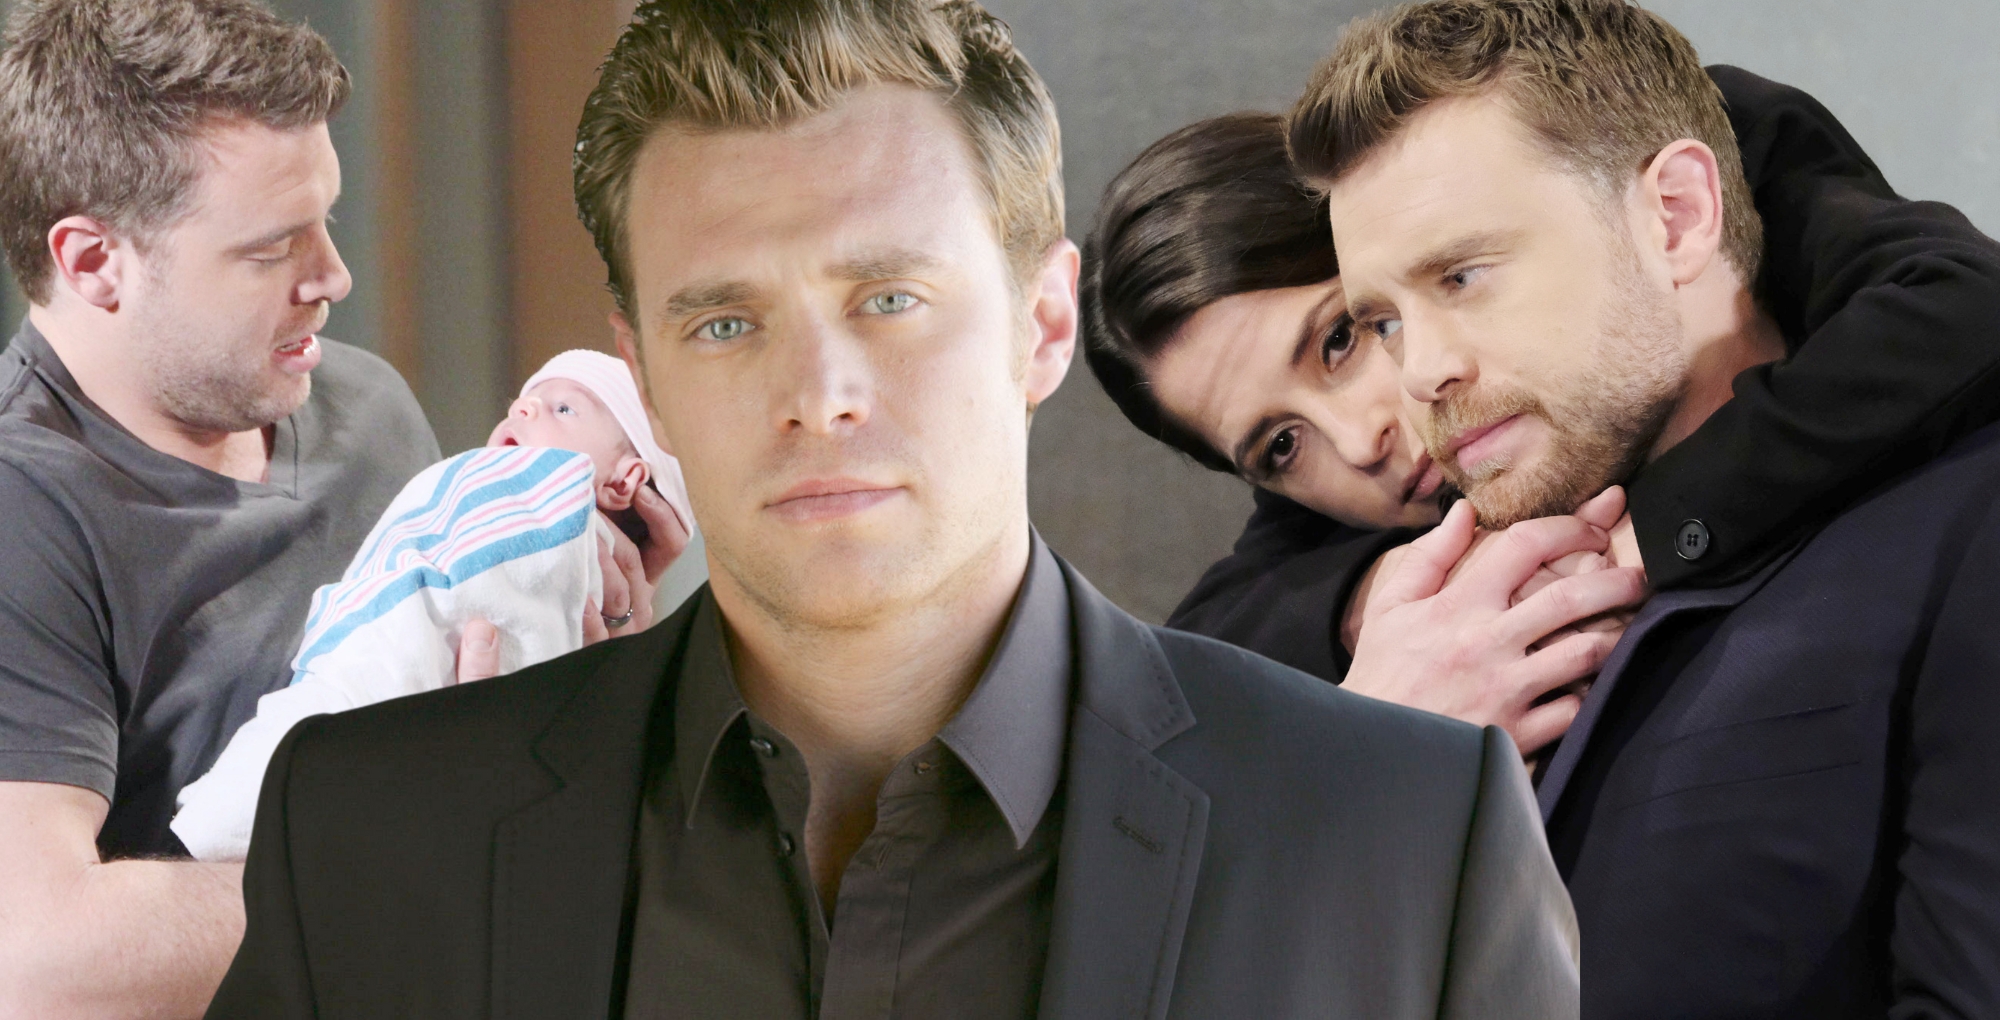 billy miller as drew, with the baby, by himself, and with sam on general hospital.